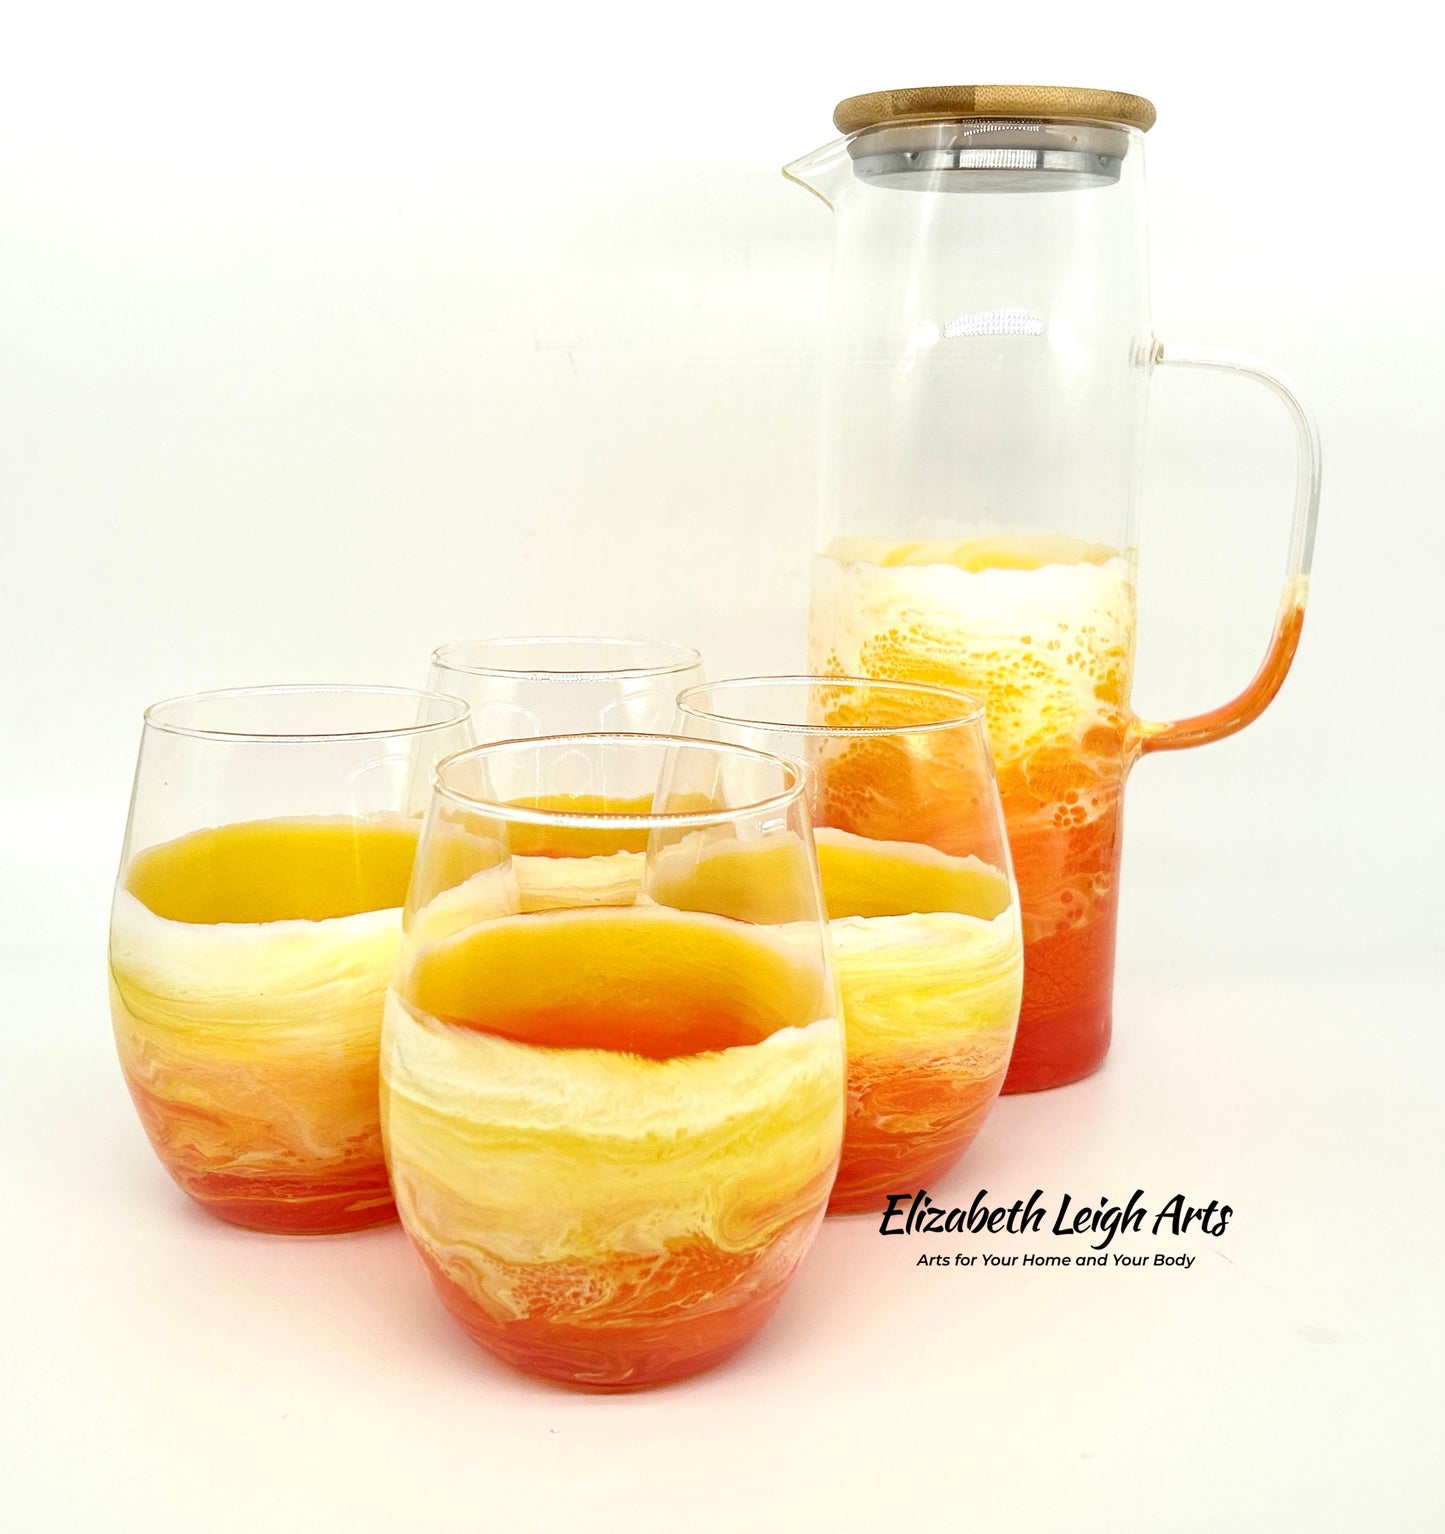 Sunset Yellow Orange Ocean Resin Art Glass Carafe Pitcher and Wine Glass Set - 3 or 5 Piece Set